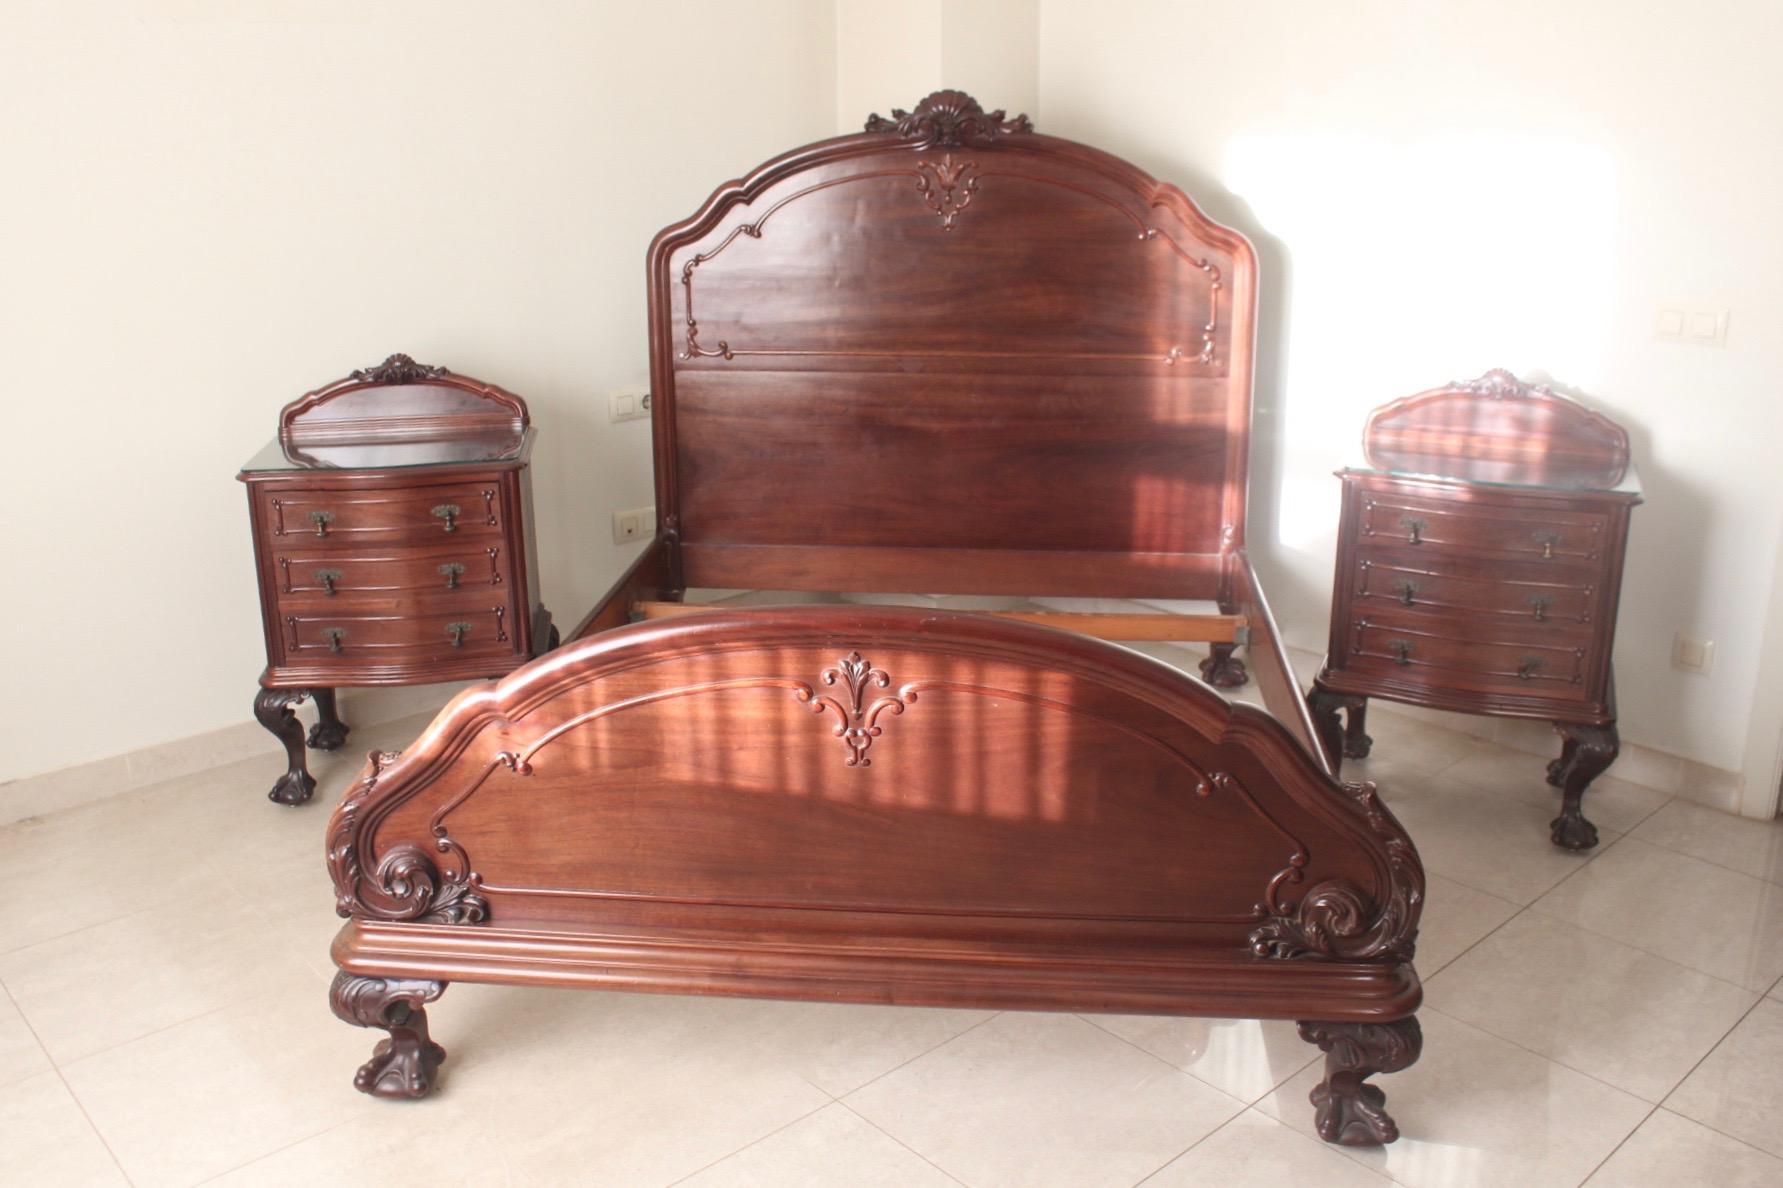 Impressive 19th century English Chippendale ball and claw mahogany bed with matching nightstands.
The set remains in excellent condition. With this currently dimension, fits 150cms mattress.
This bed and nightstands, were made in London, circa